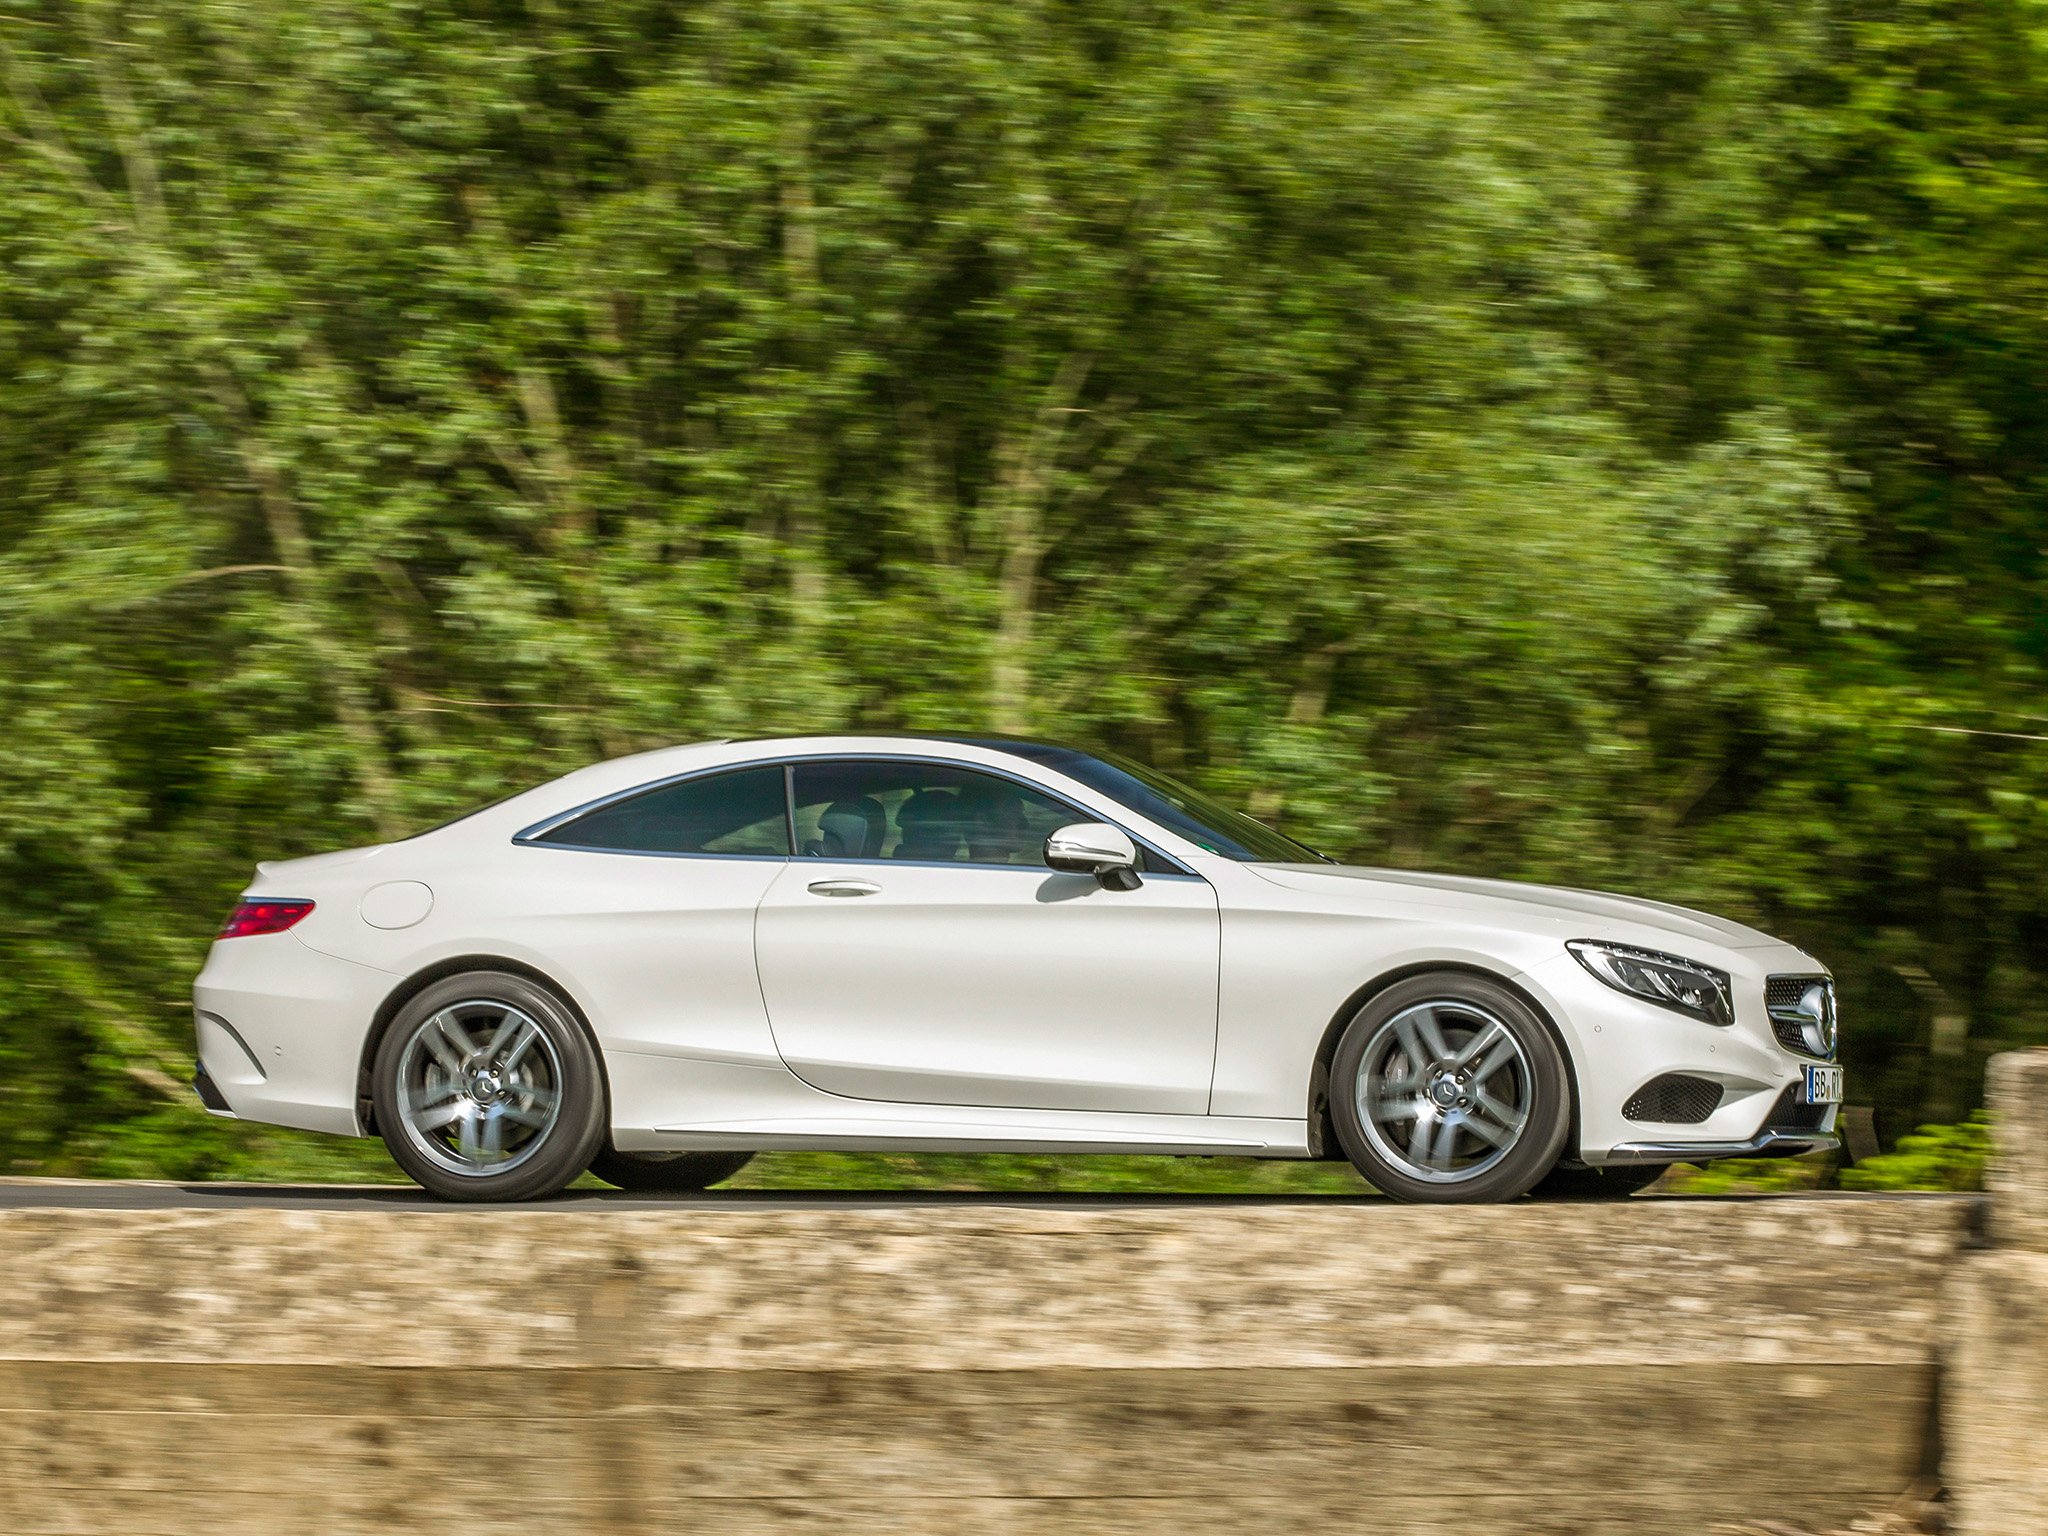 2014, Mercedes, Benz, S500, Coupe, 4matic, Amg, Sports, Package,  c217 , 500 Wallpaper